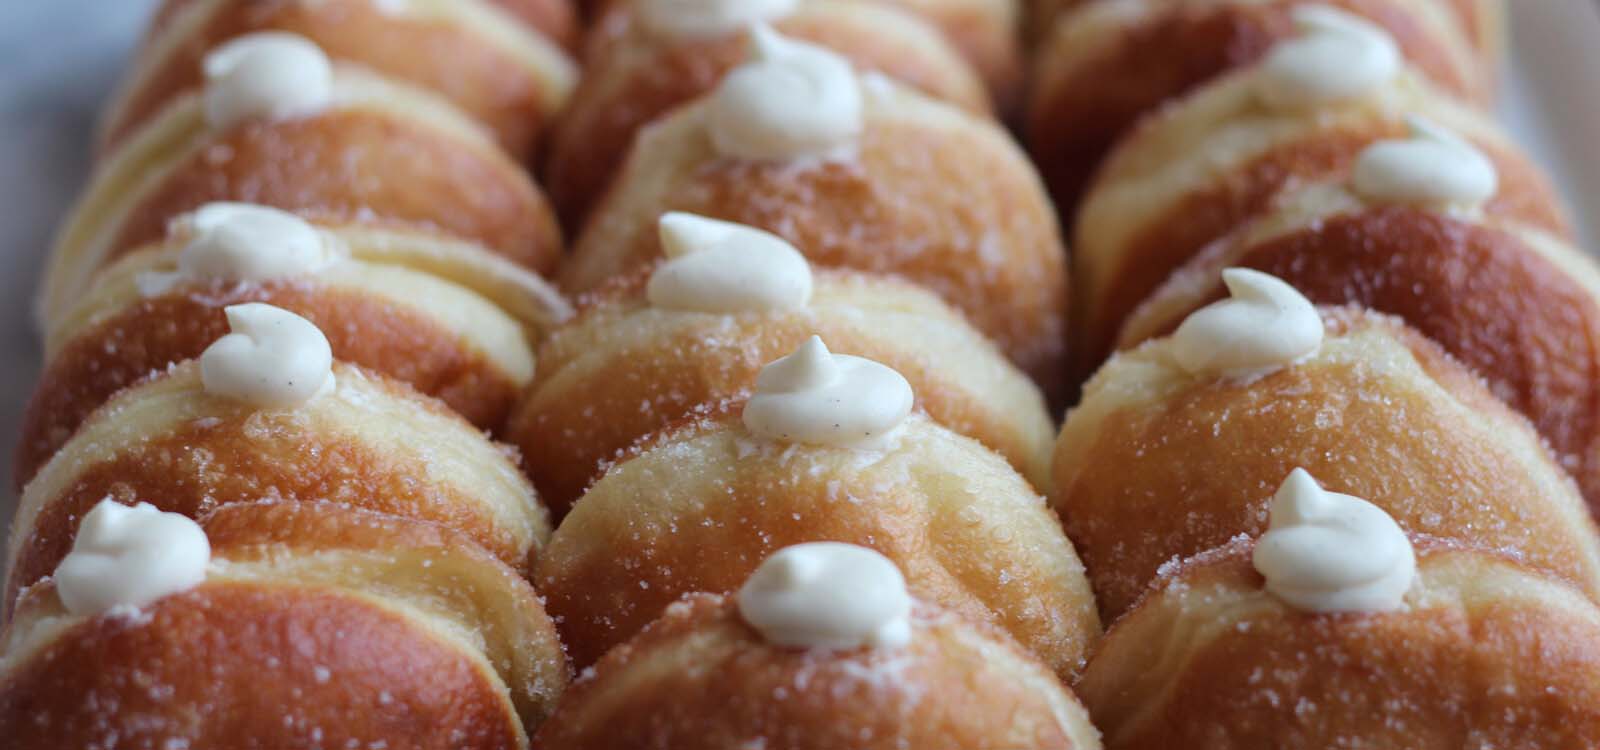 Rows of custard filled donuts.